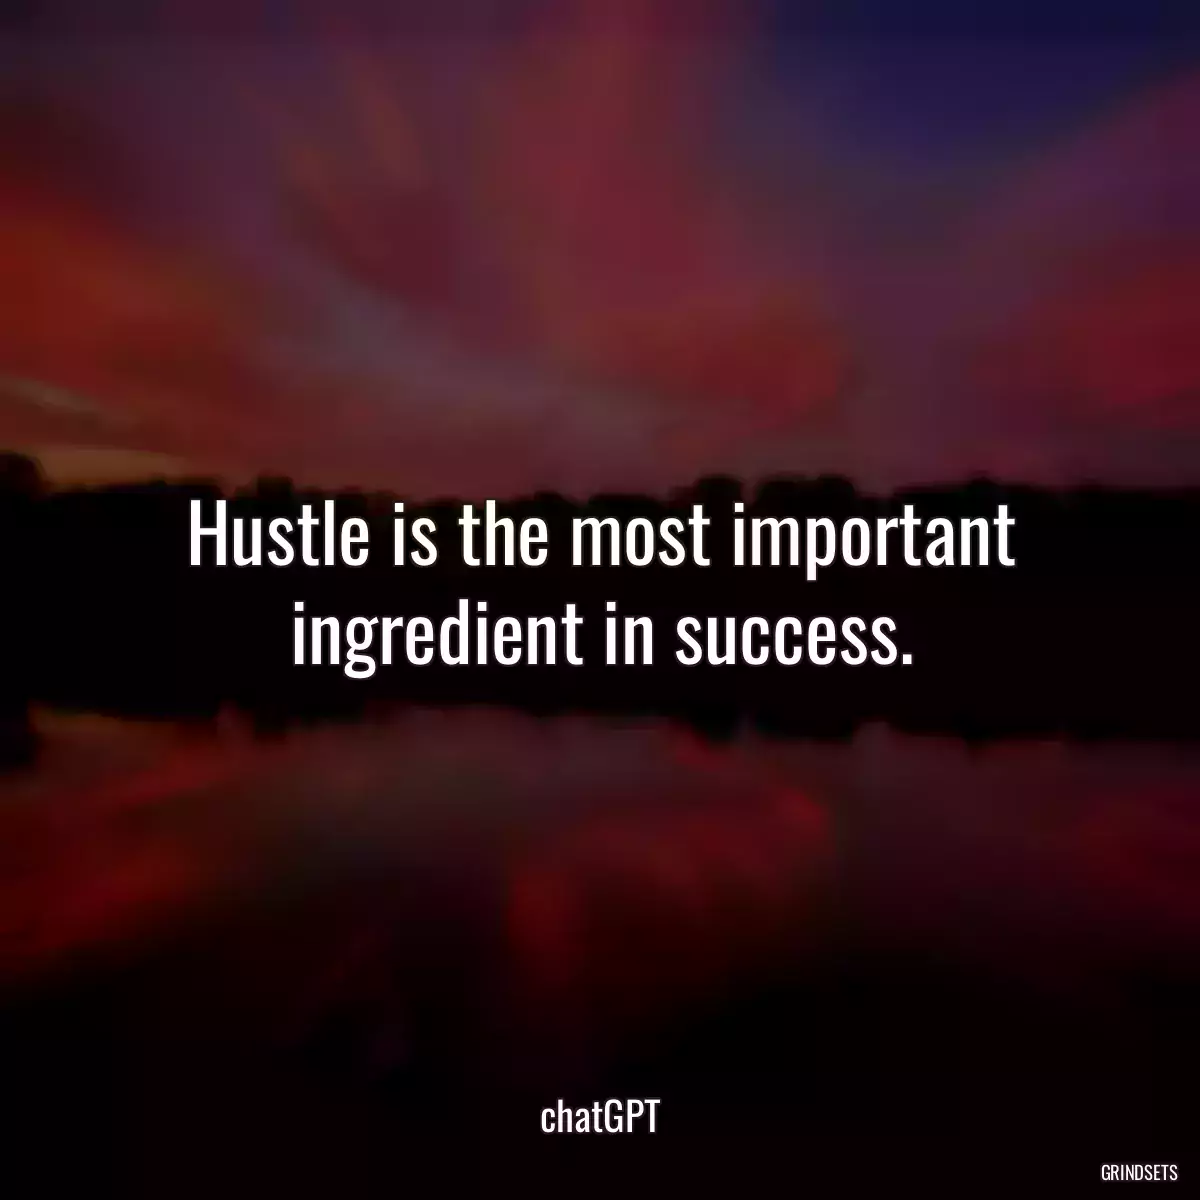 Hustle is the most important ingredient in success.